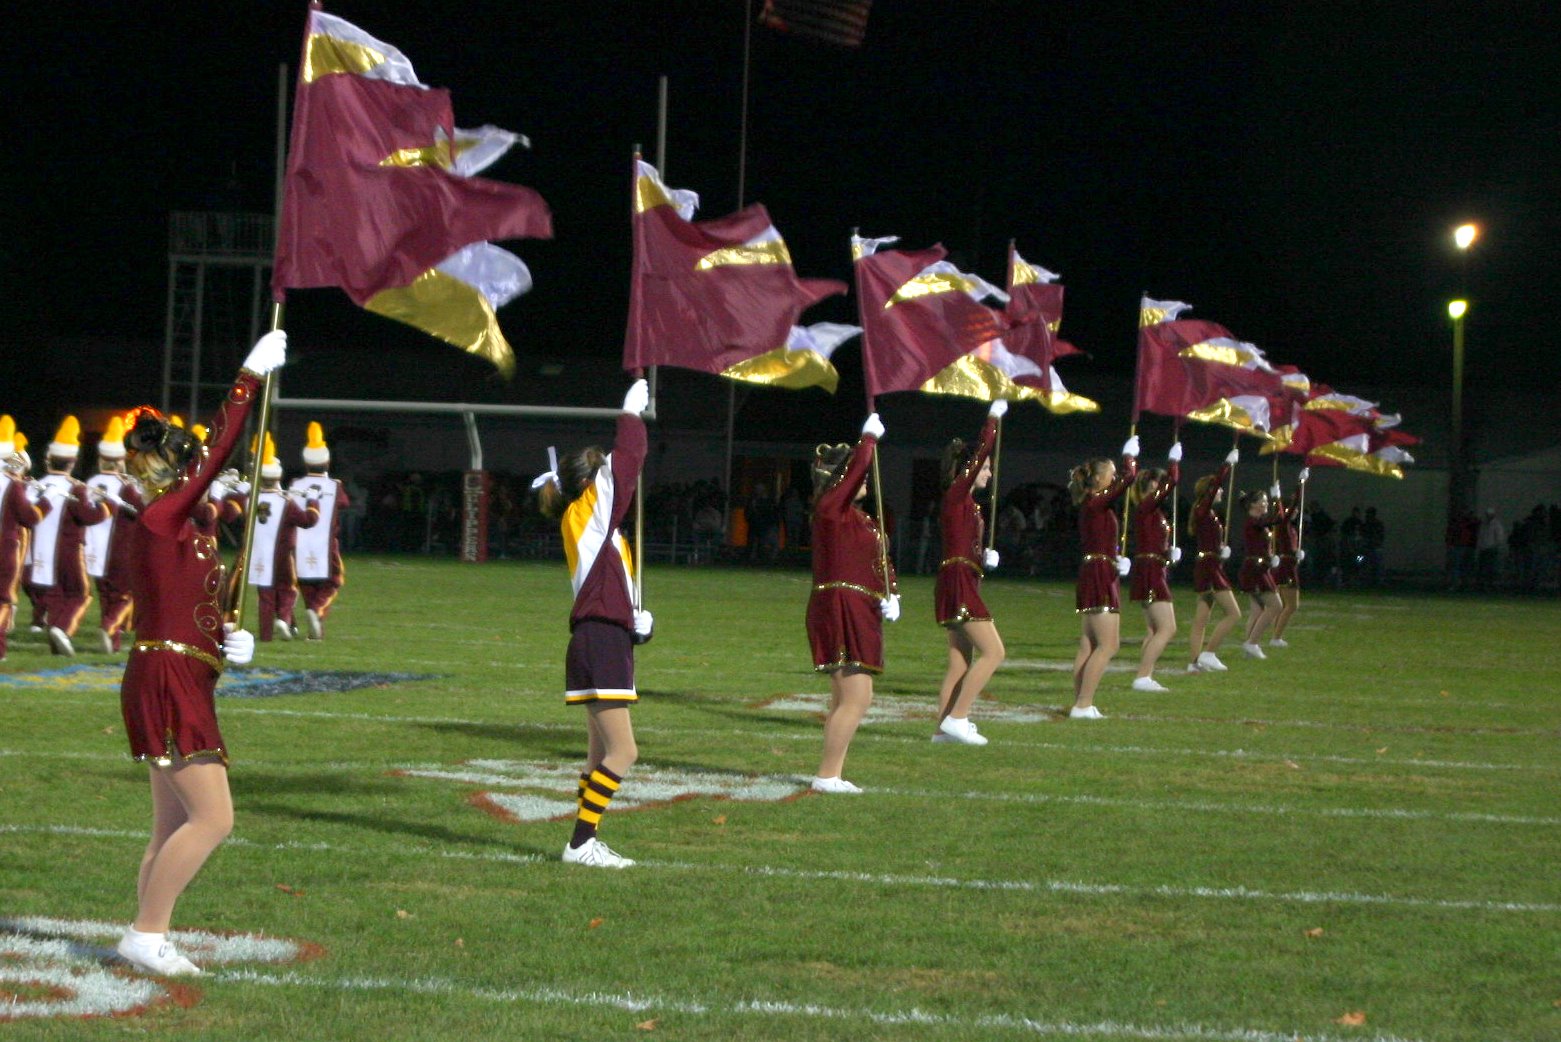 The South Range flagline shows off their school colors.